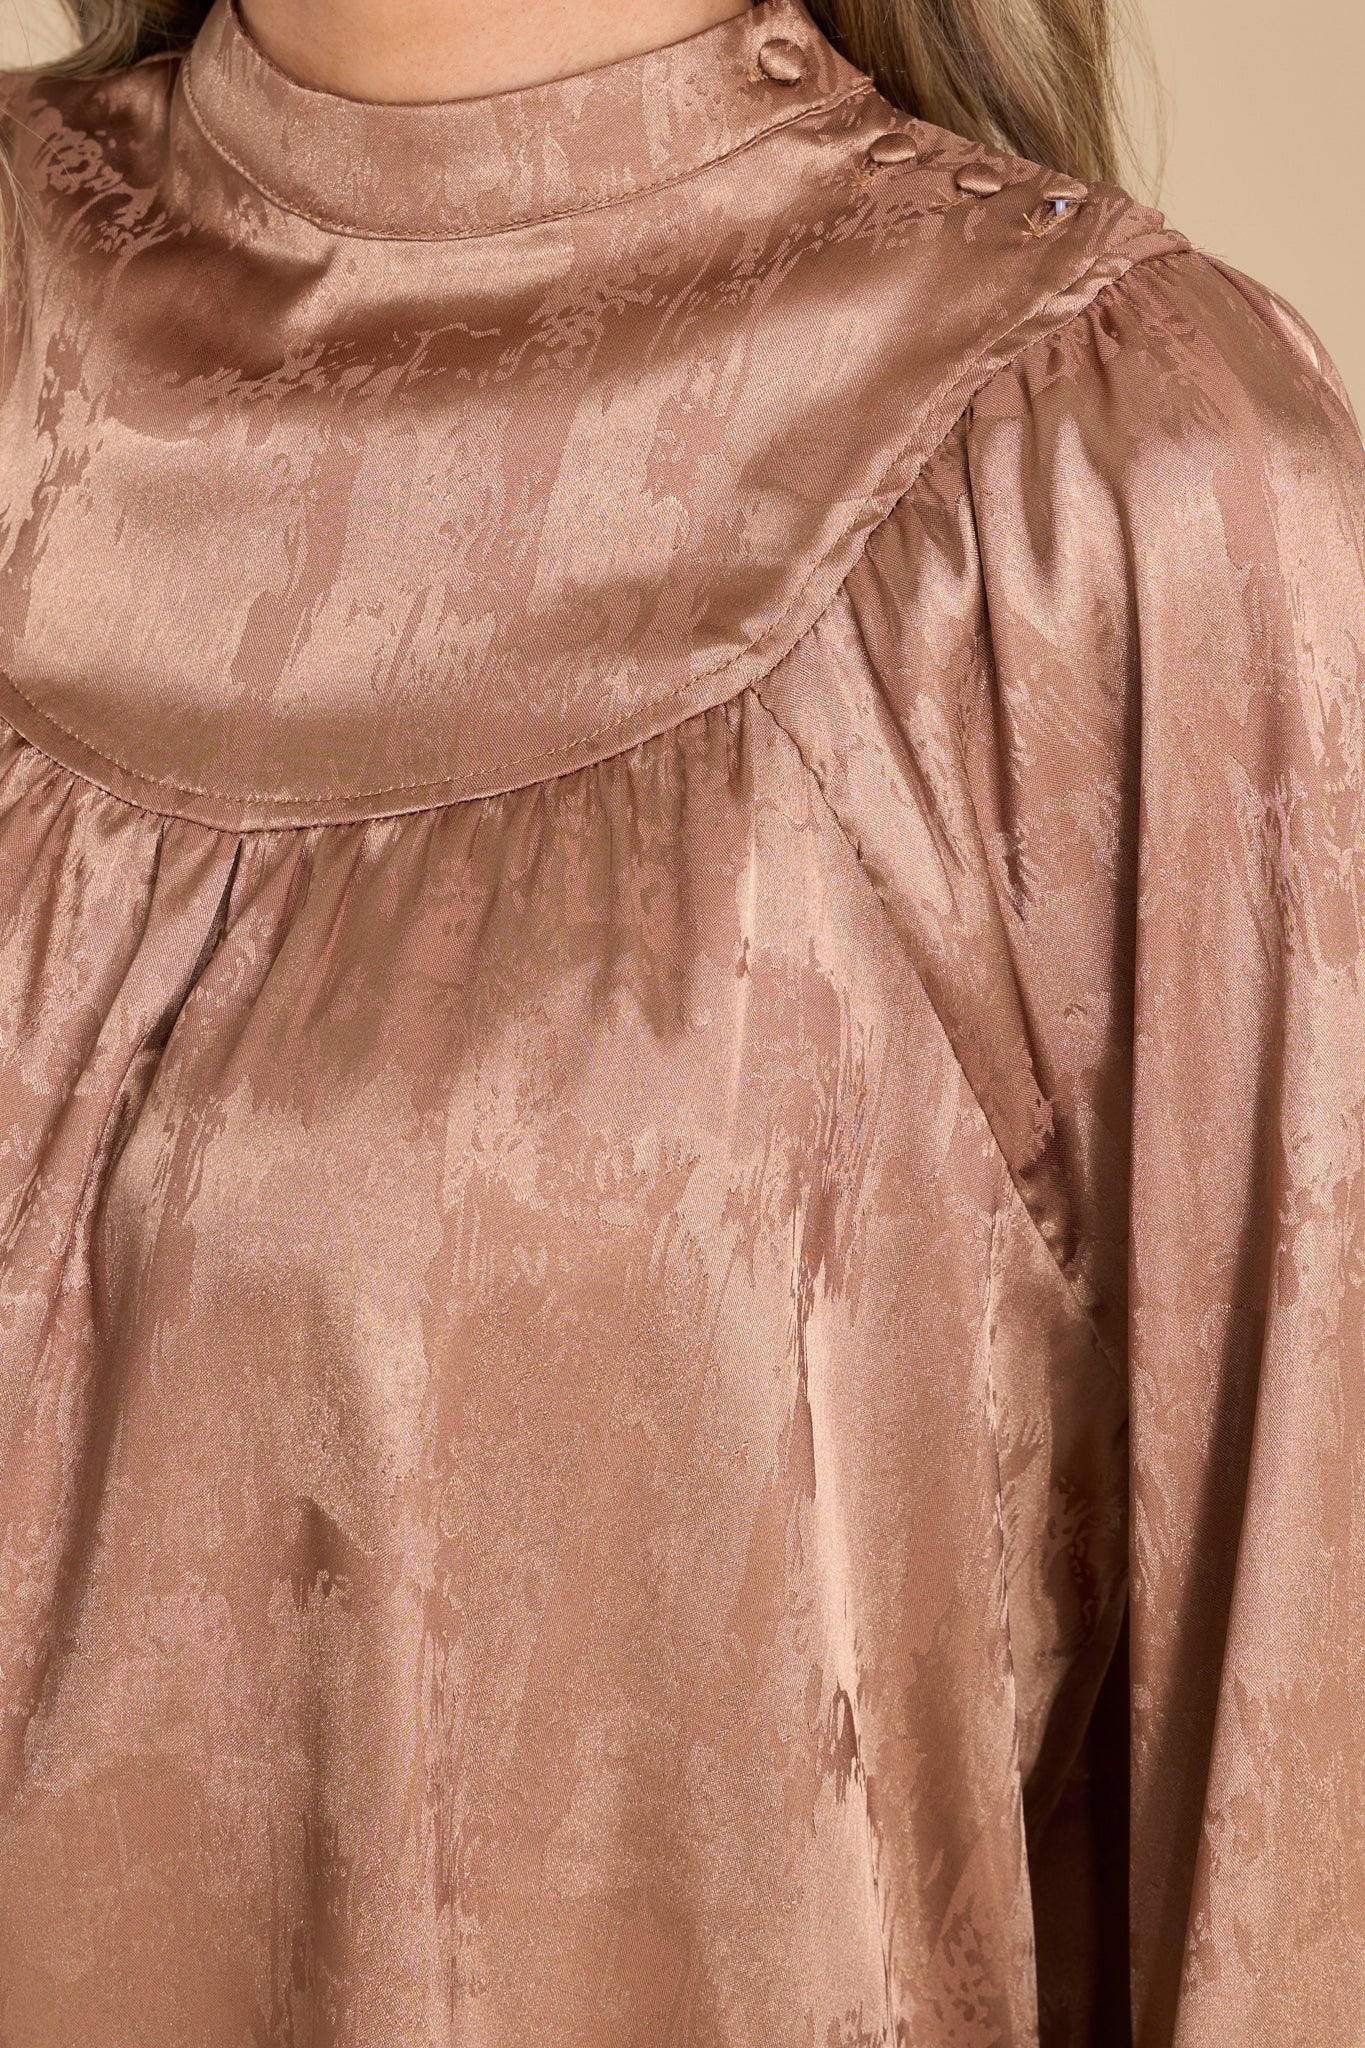 Close up view of this shiny satin-like top that features a high neckline with buttons trailing down on top of the shoulder.